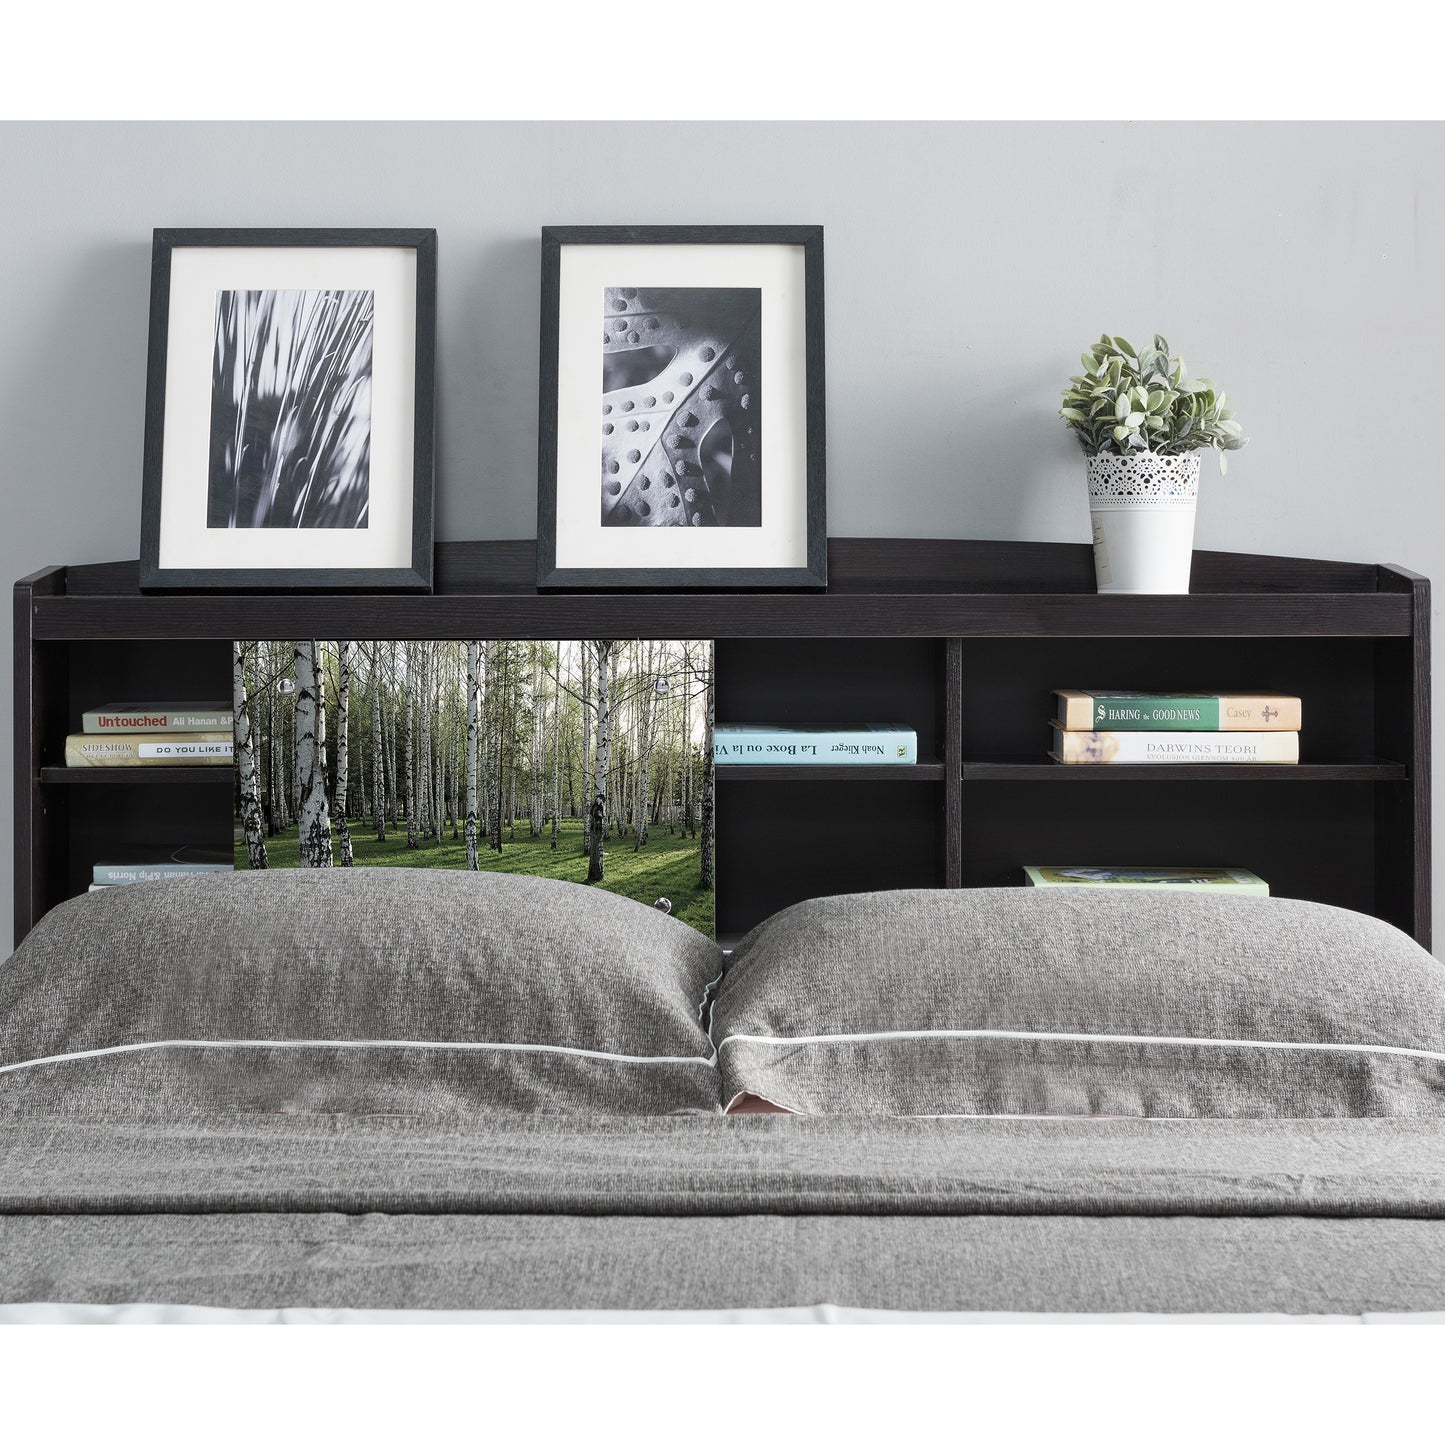 Front-facing contemporary cappuccino six-shelf bookcase headboard with sliding center panel to one side in a bedroom with accessories